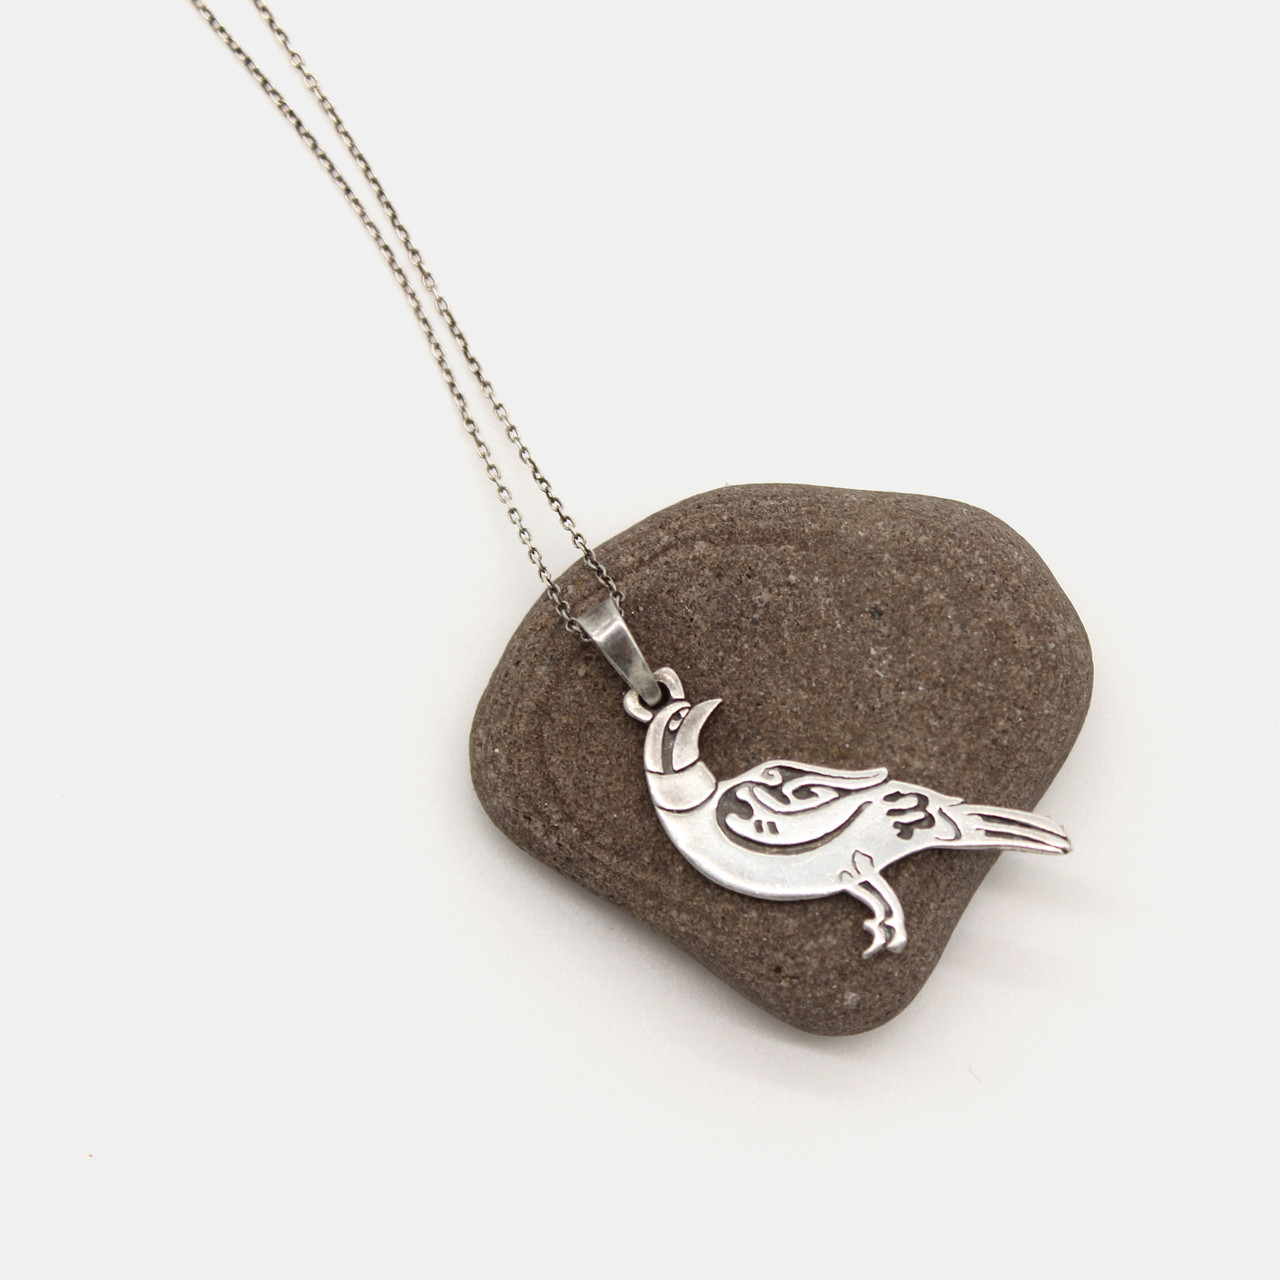 Sterling Silver Oval Raven Bird Pendant Necklace – JKC Murano